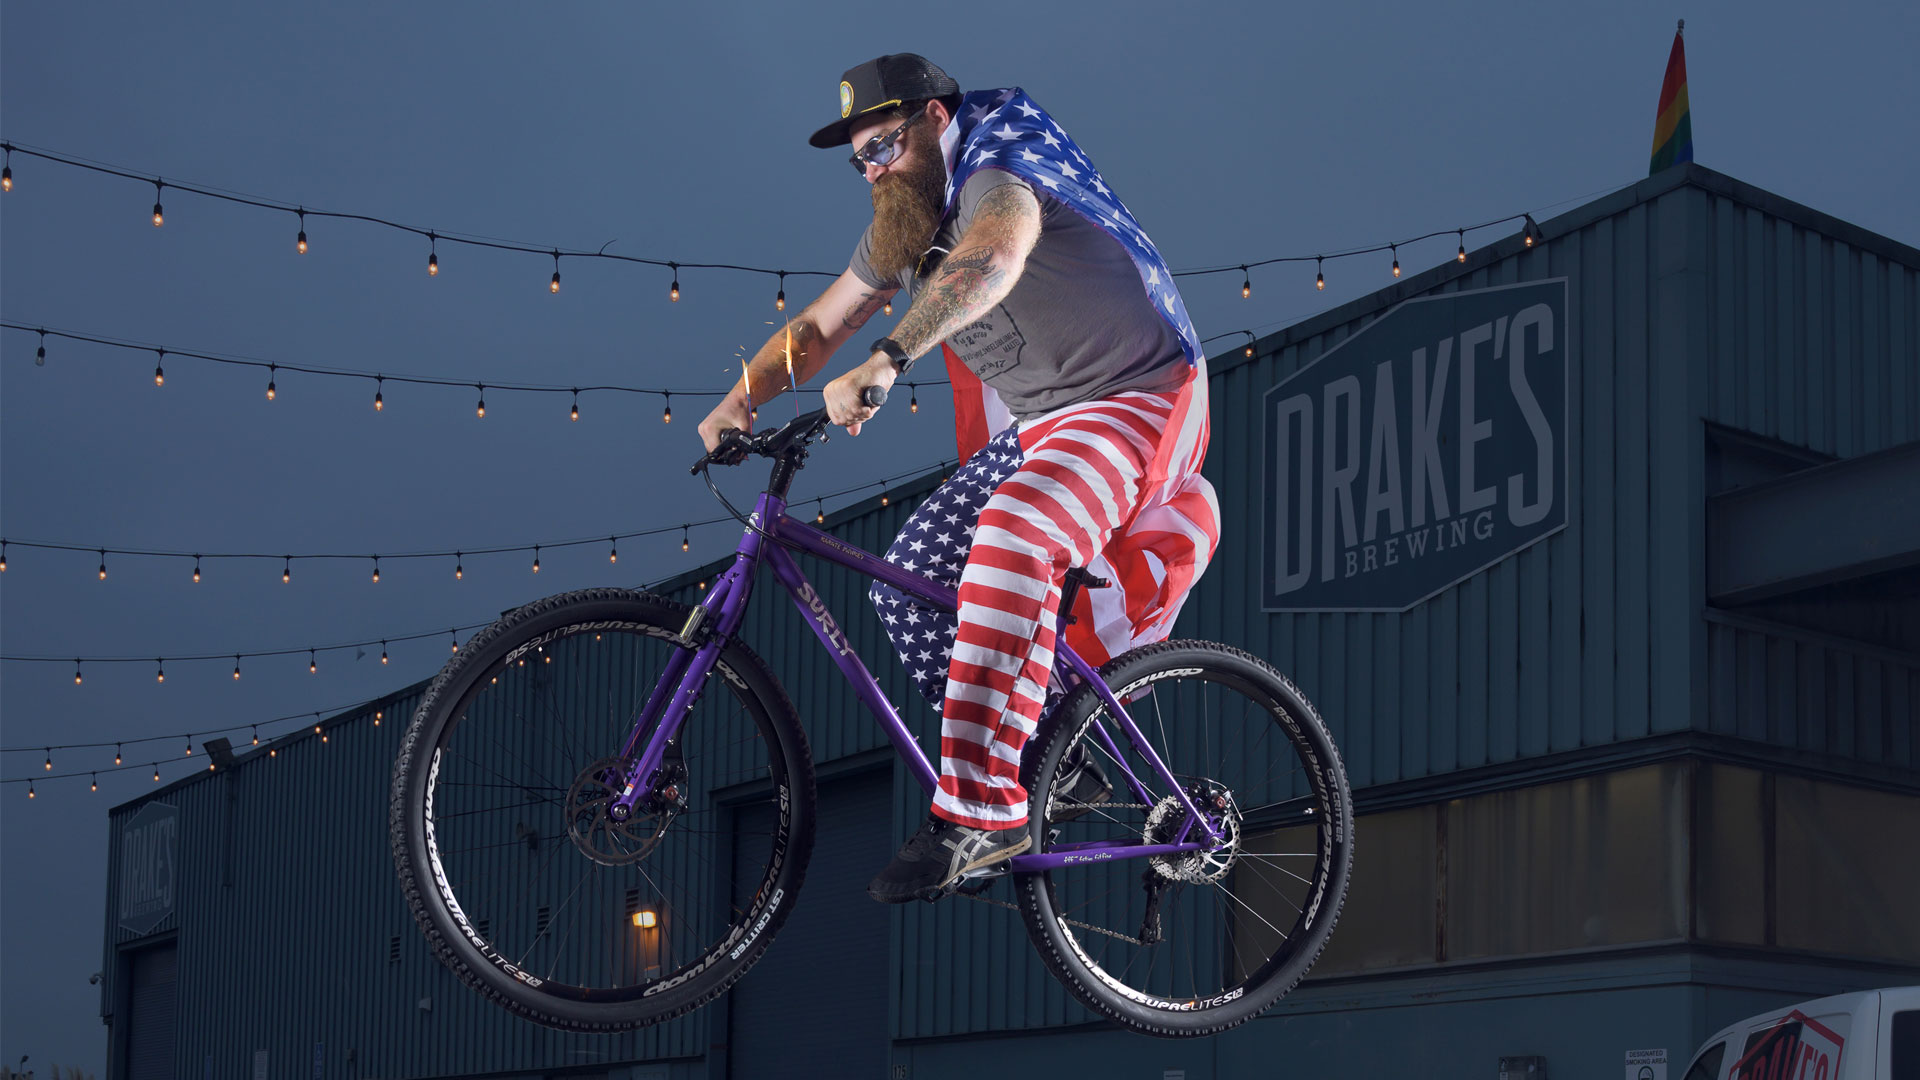 Drake's brewer riding bike in USA colors